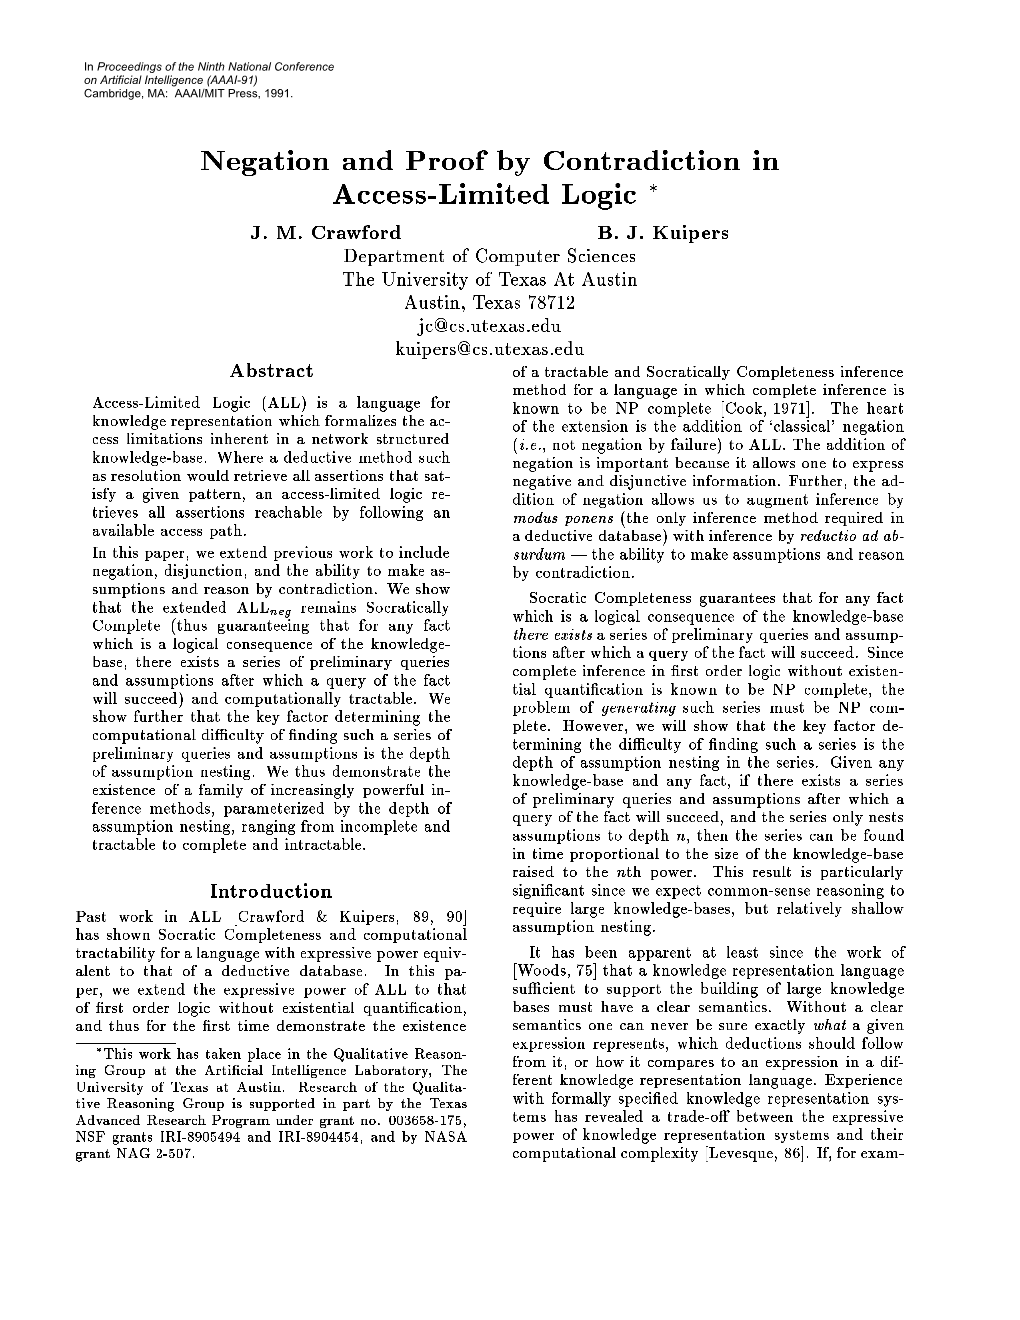 Negation and Proof by Contradiction in Access-Limited Logic